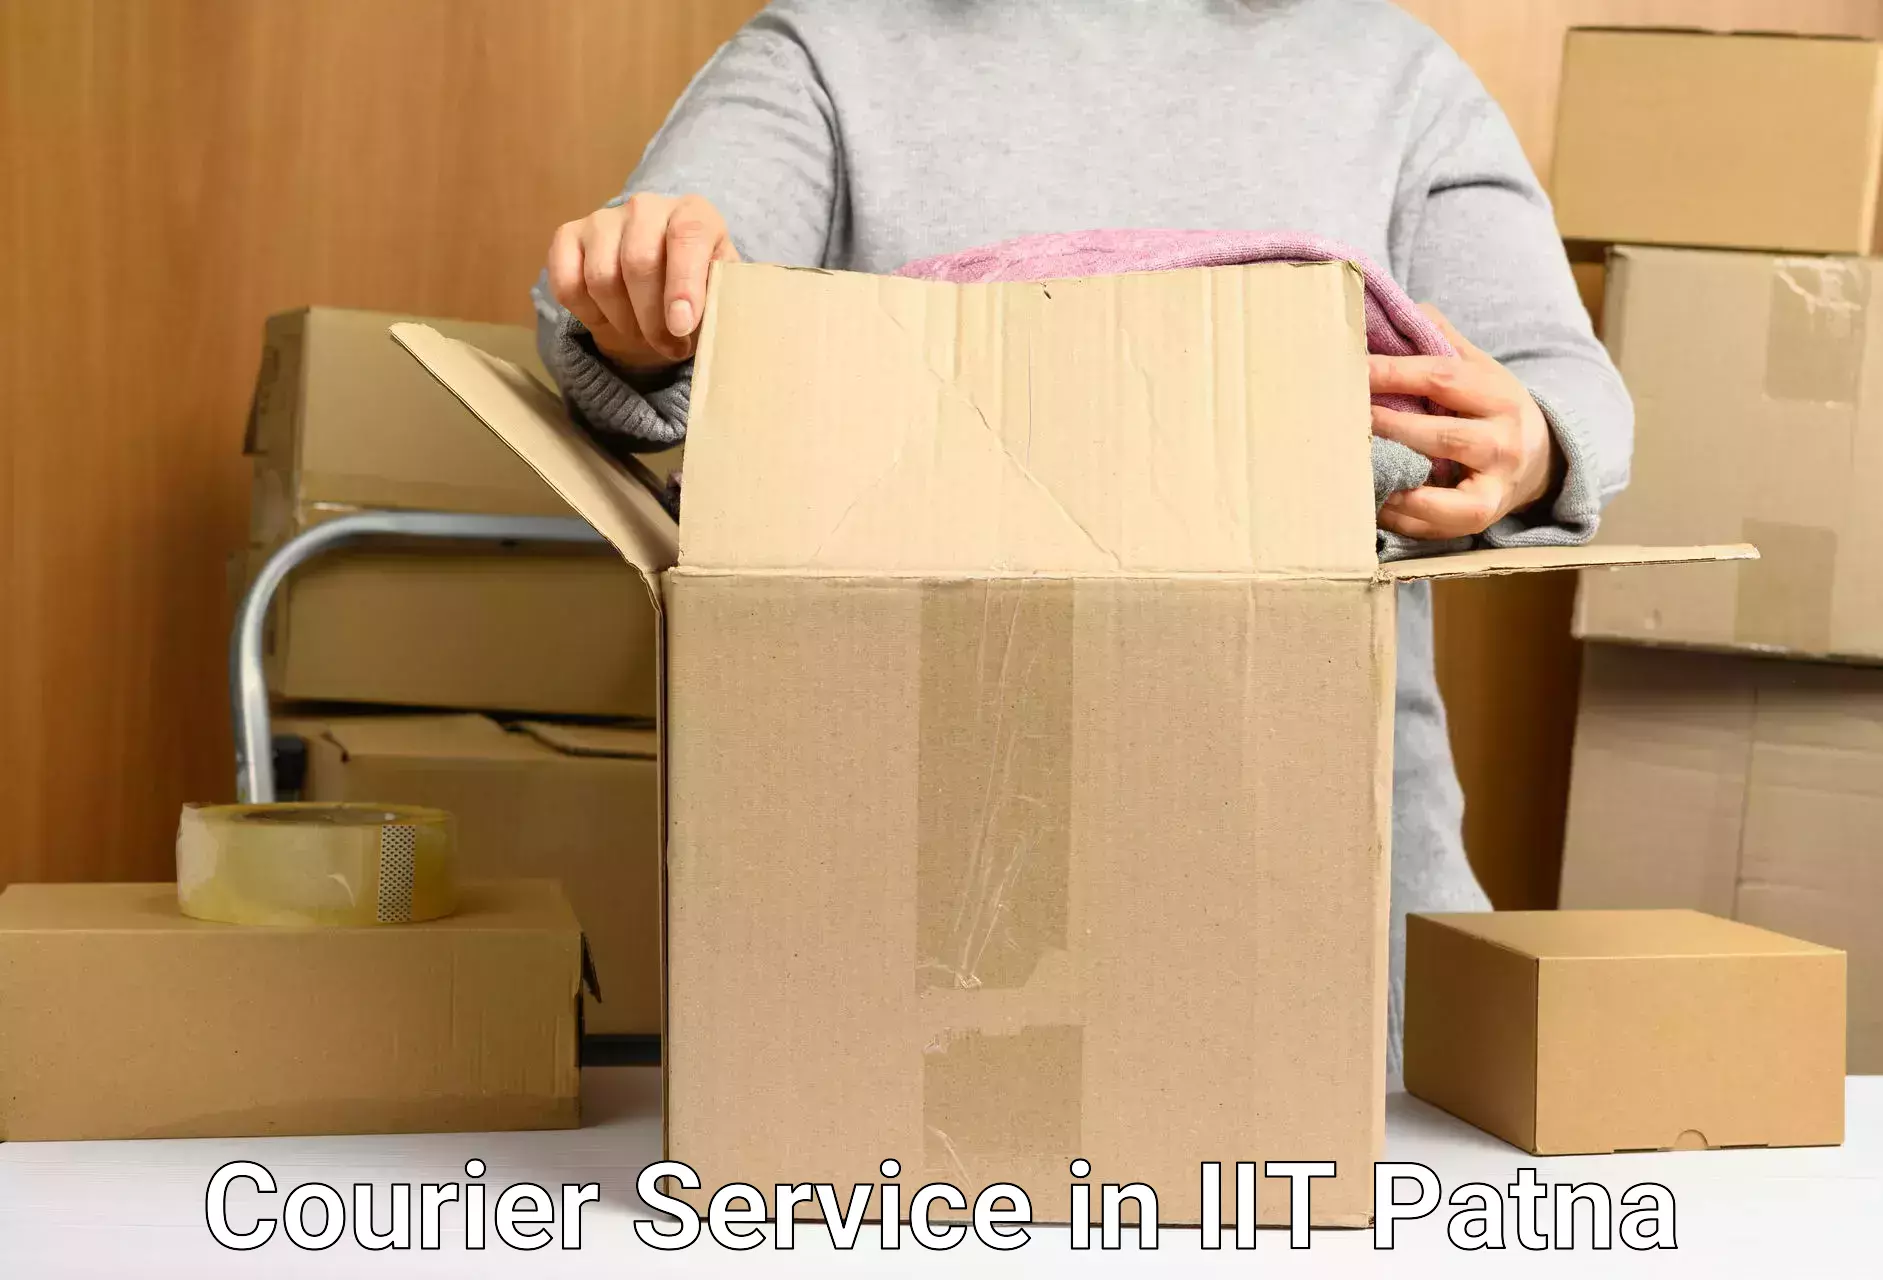 Express mail solutions in IIT Patna